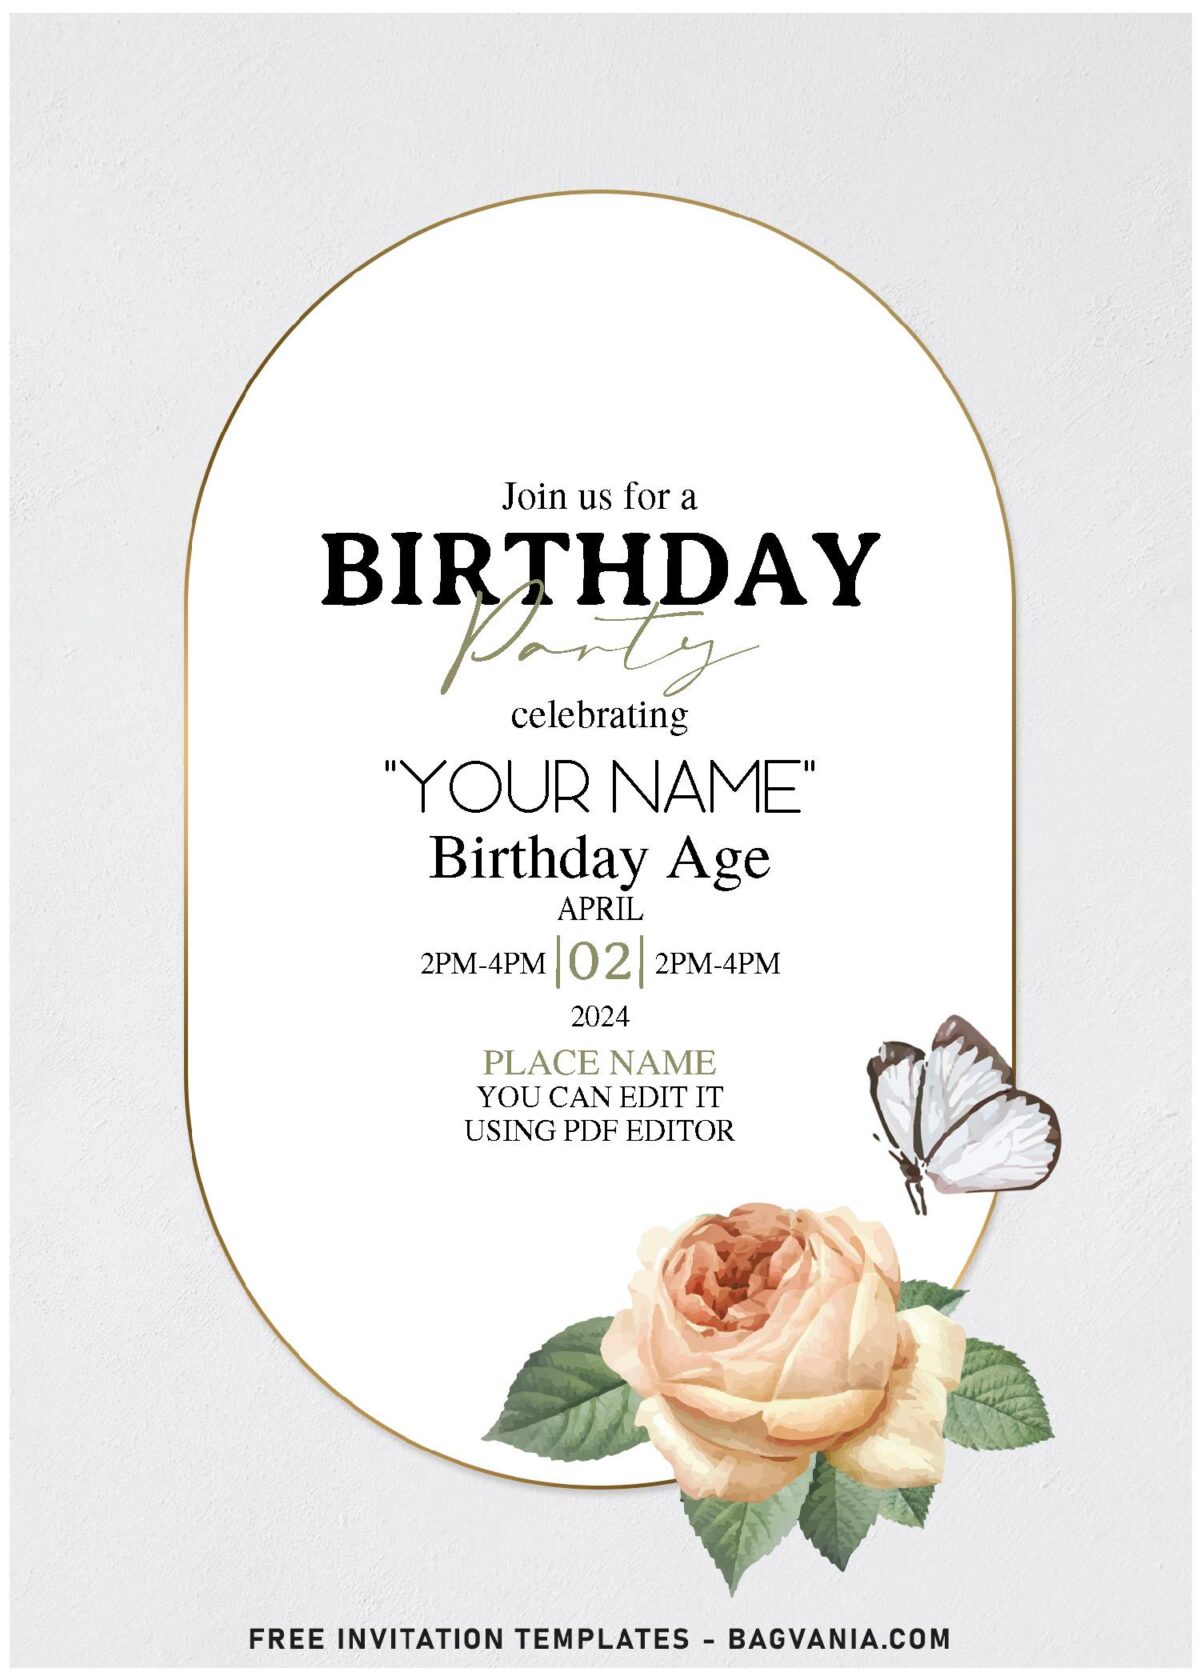 (Free Editable PDF) Blissful Garden Flower And Greenery Invitation Templates with garden roses and butterfly